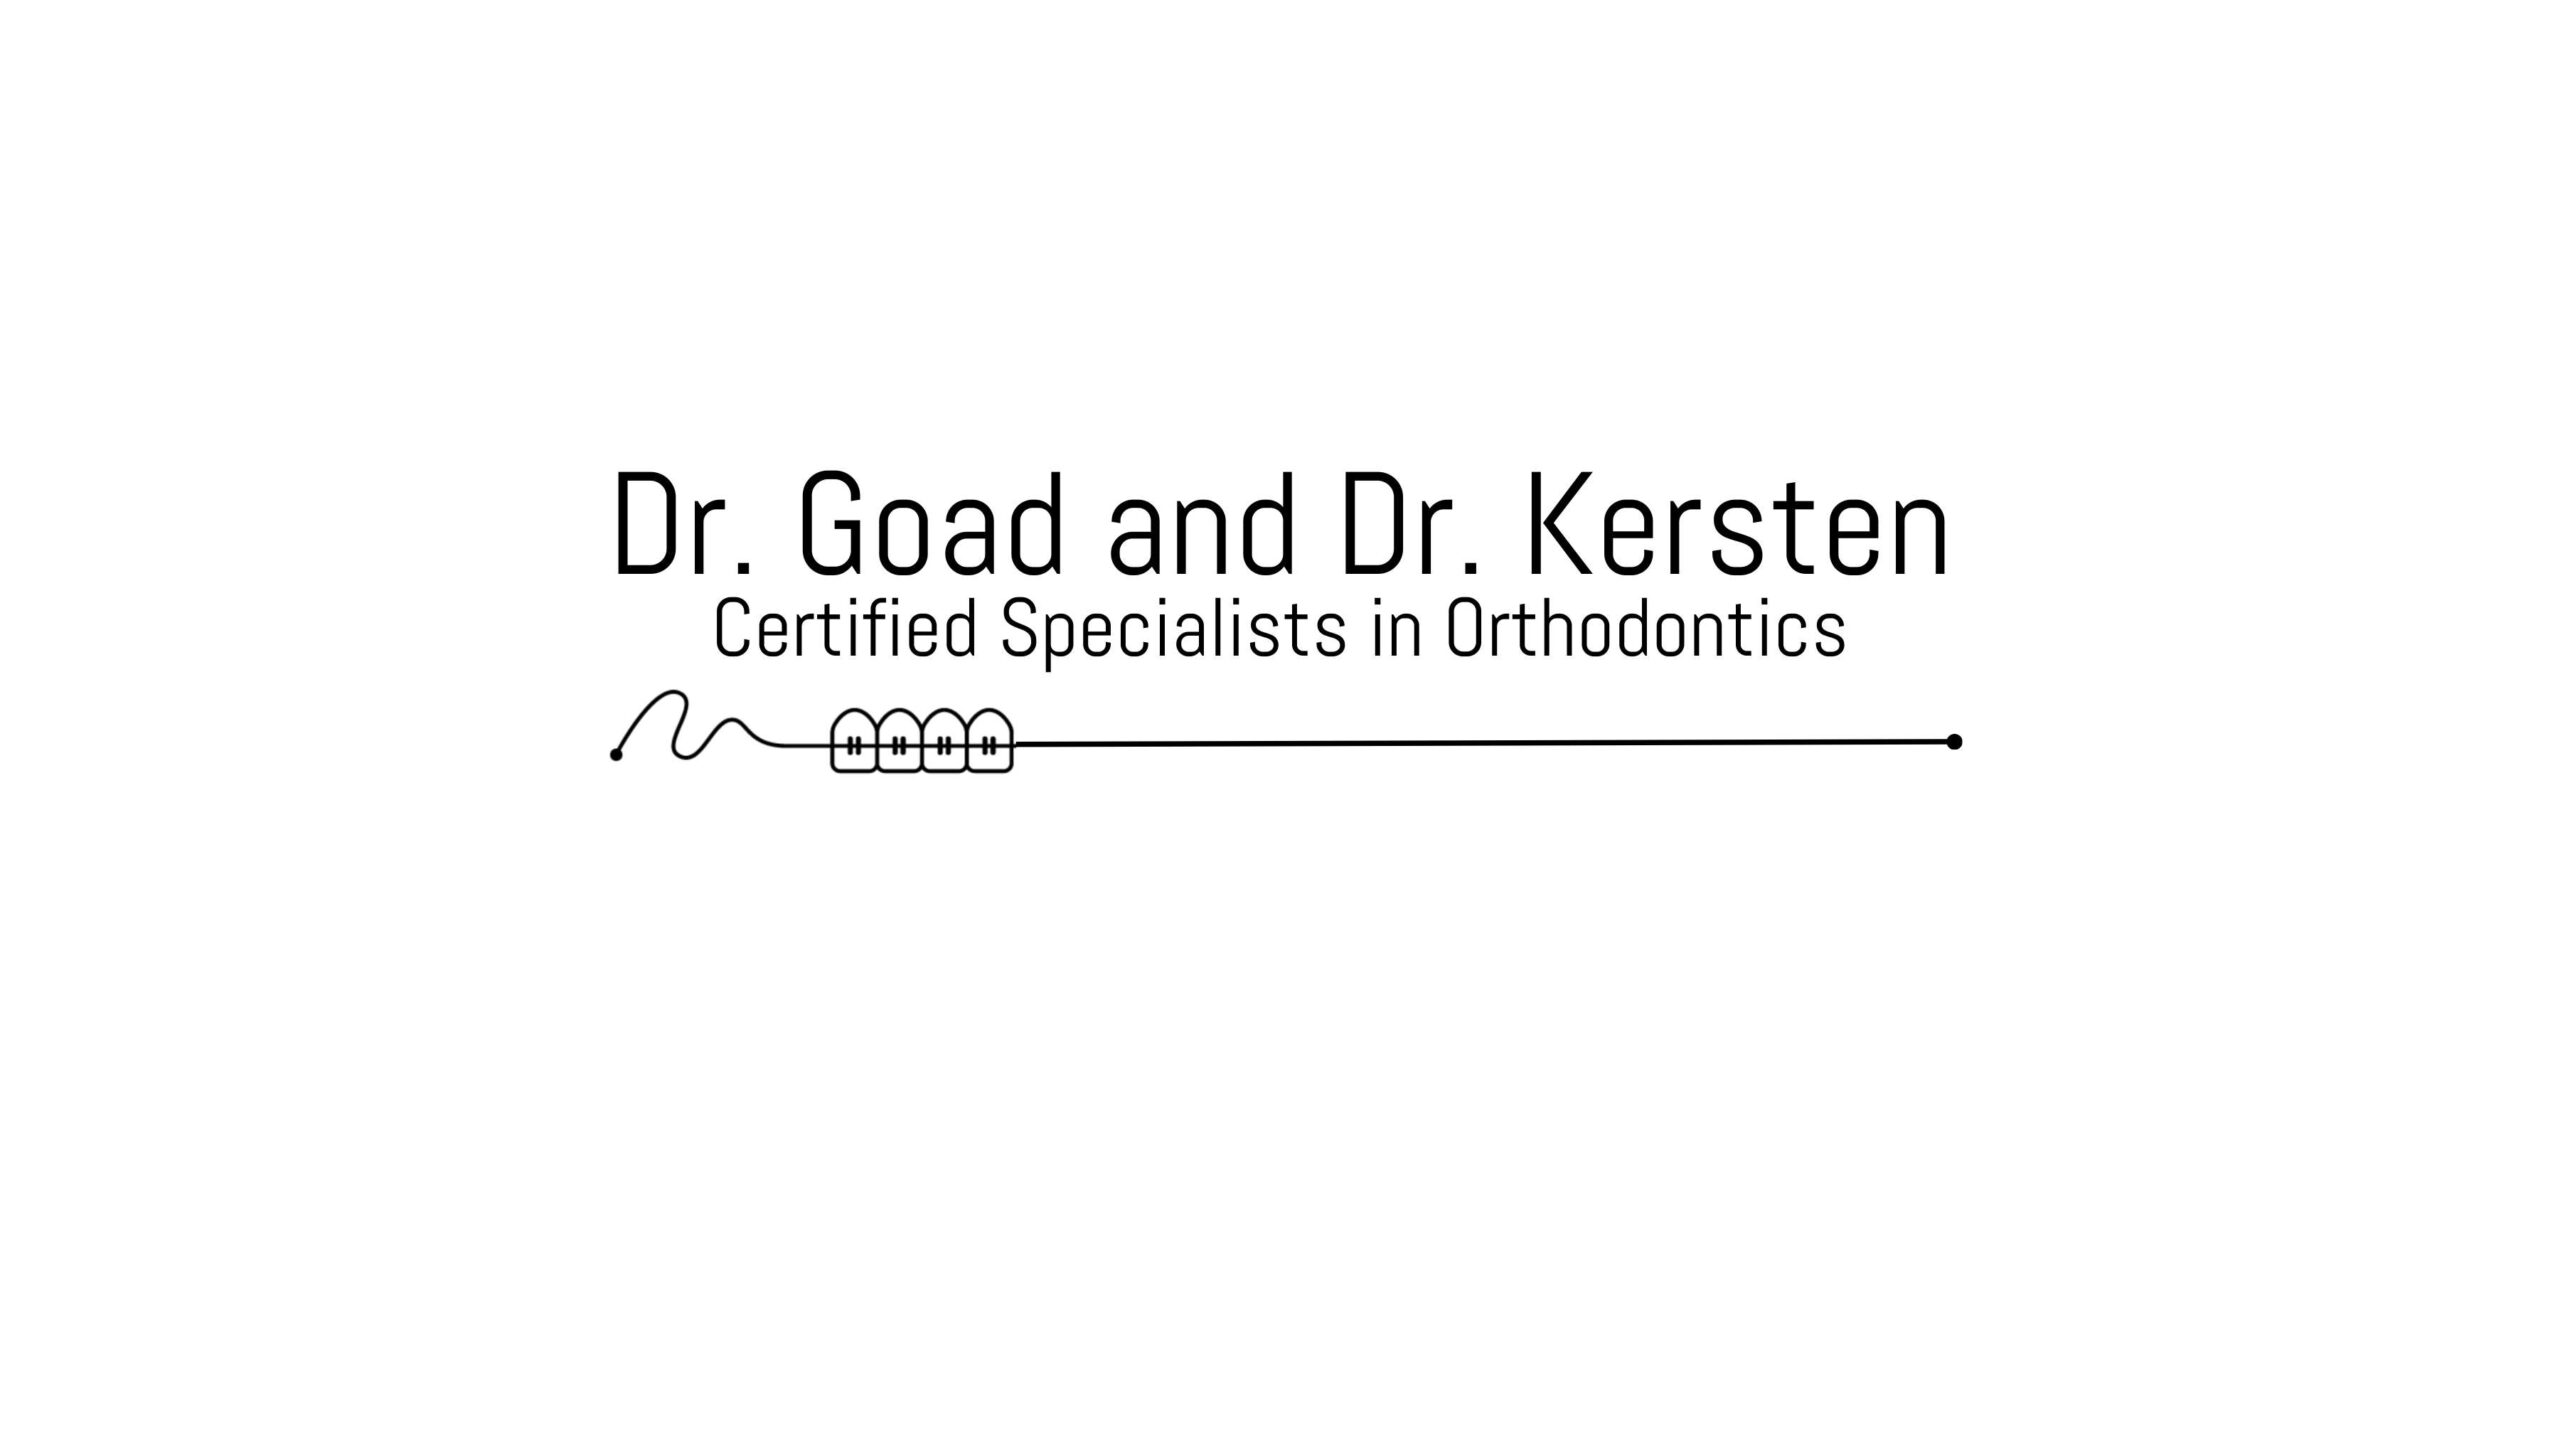 Dr Goed and Dr Kersten